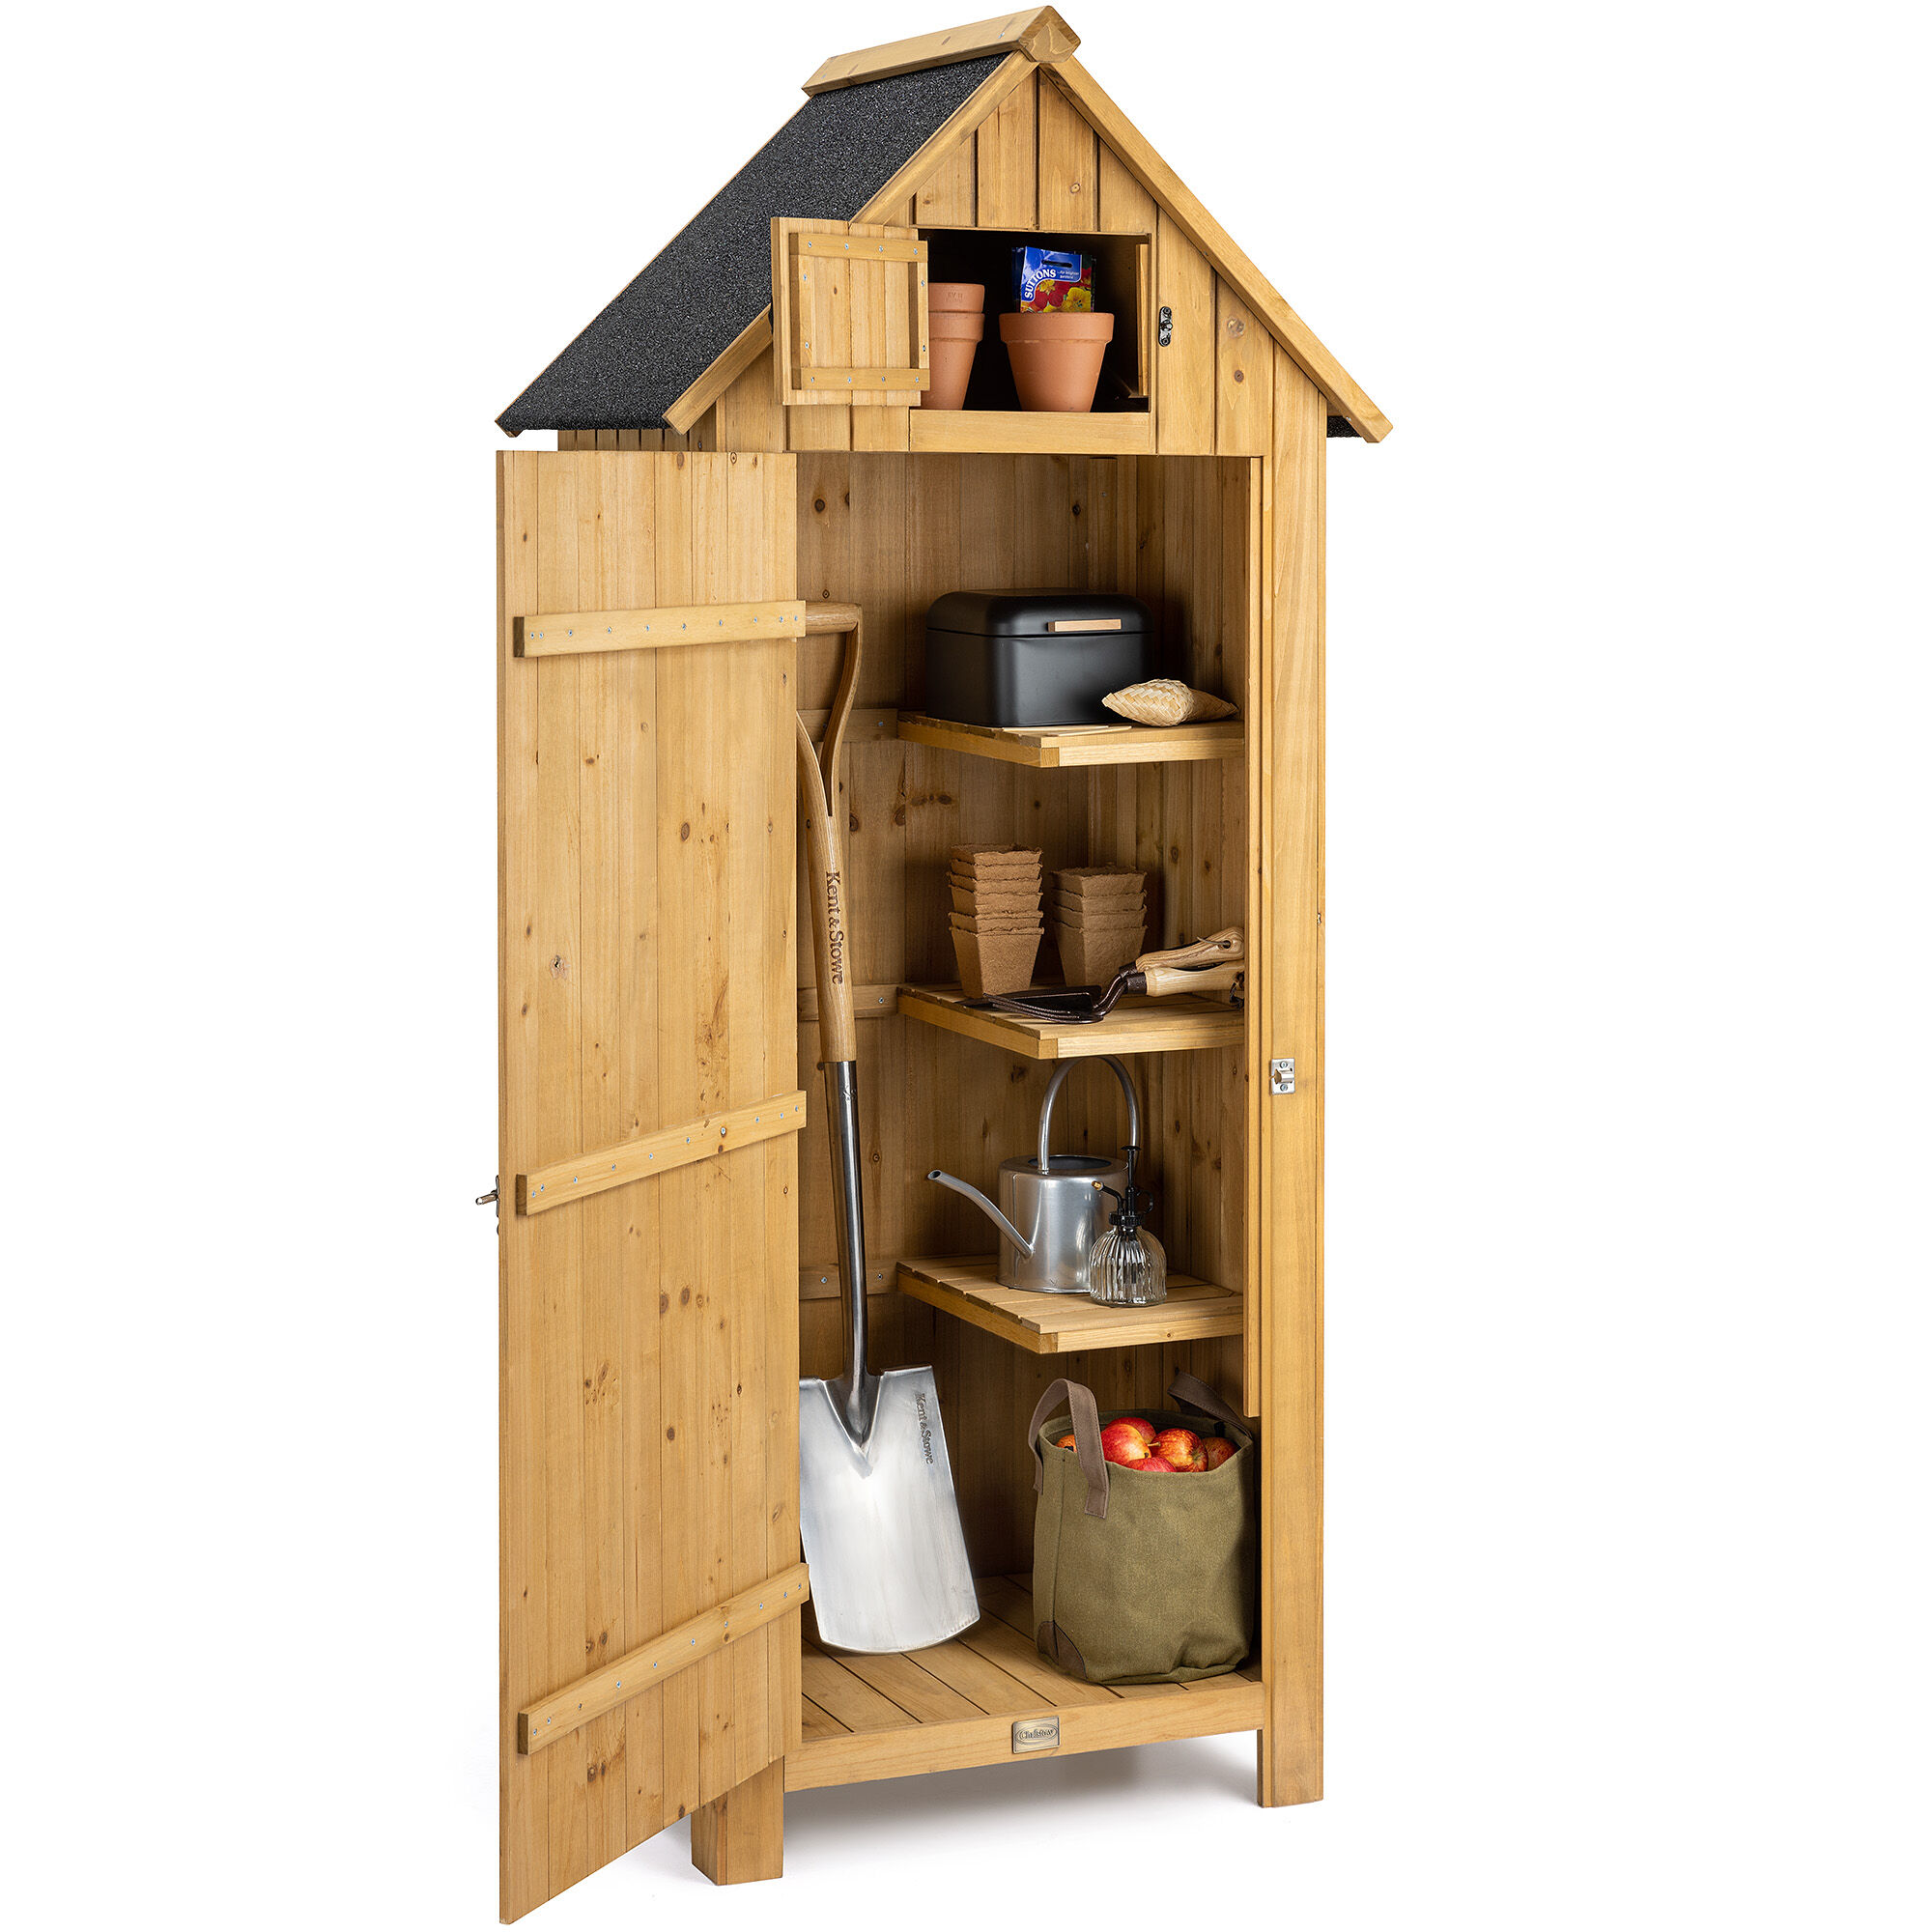 Christow Narrow Garden Shed (H6ft x W2.5ft x D1.8ft) – Natural Wood - Natural